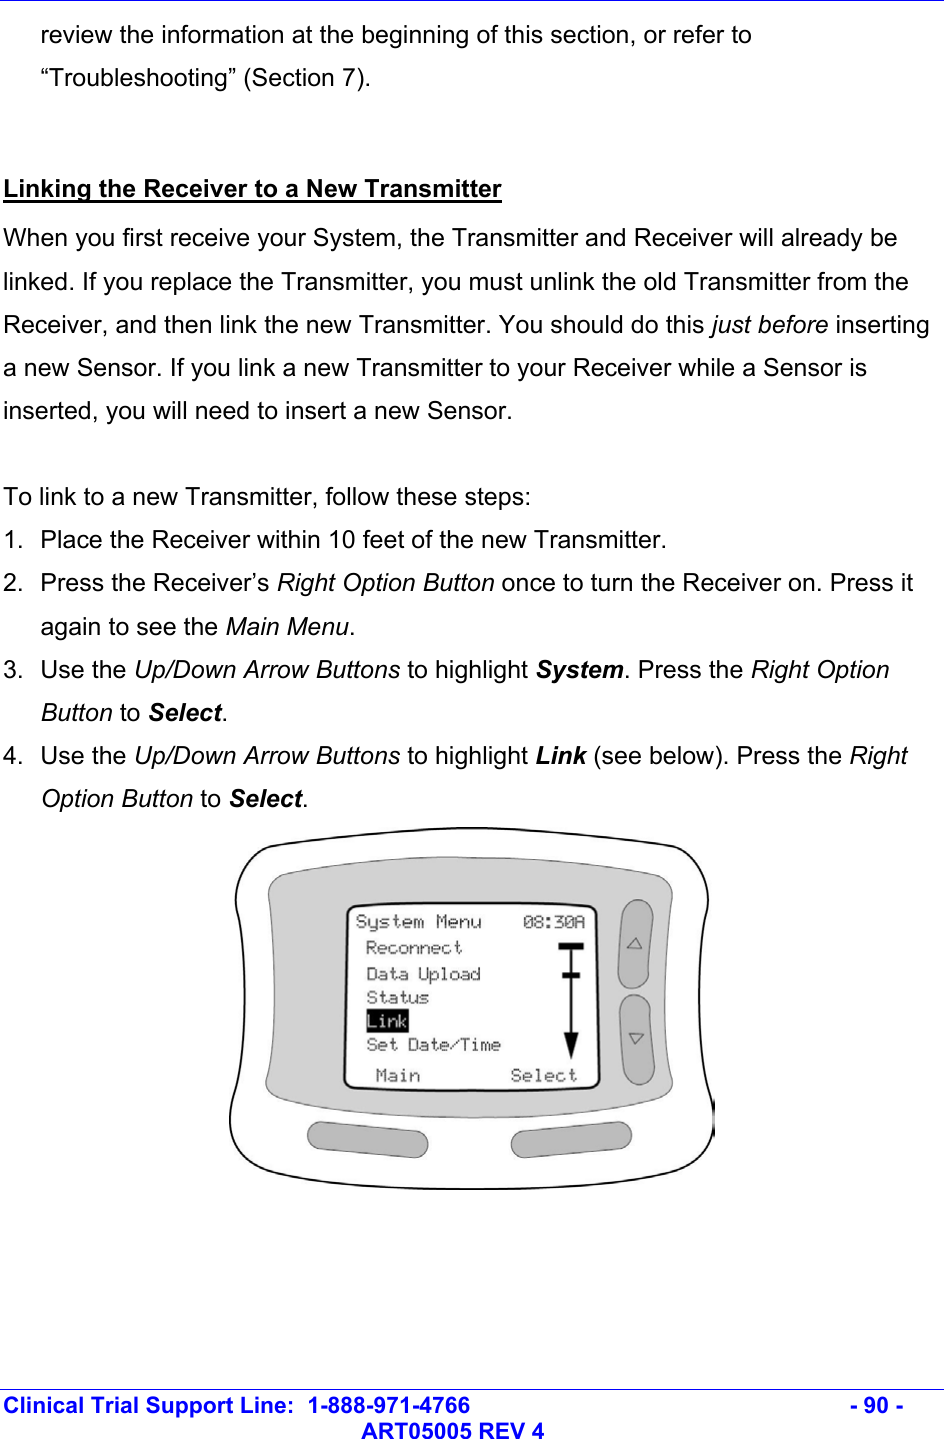   Clinical Trial Support Line:  1-888-971-4766   - 90 -   ART05005 REV 4 review the information at the beginning of this section, or refer to “Troubleshooting” (Section 7).  Linking the Receiver to a New Transmitter When you first receive your System, the Transmitter and Receiver will already be linked. If you replace the Transmitter, you must unlink the old Transmitter from the Receiver, and then link the new Transmitter. You should do this just before inserting a new Sensor. If you link a new Transmitter to your Receiver while a Sensor is inserted, you will need to insert a new Sensor.  To link to a new Transmitter, follow these steps: 1.  Place the Receiver within 10 feet of the new Transmitter. 2. Press the Receiver’s Right Option Button once to turn the Receiver on. Press it again to see the Main Menu.  3. Use the Up/Down Arrow Buttons to highlight System. Press the Right Option Button to Select.  4. Use the Up/Down Arrow Buttons to highlight Link (see below). Press the Right Option Button to Select.  